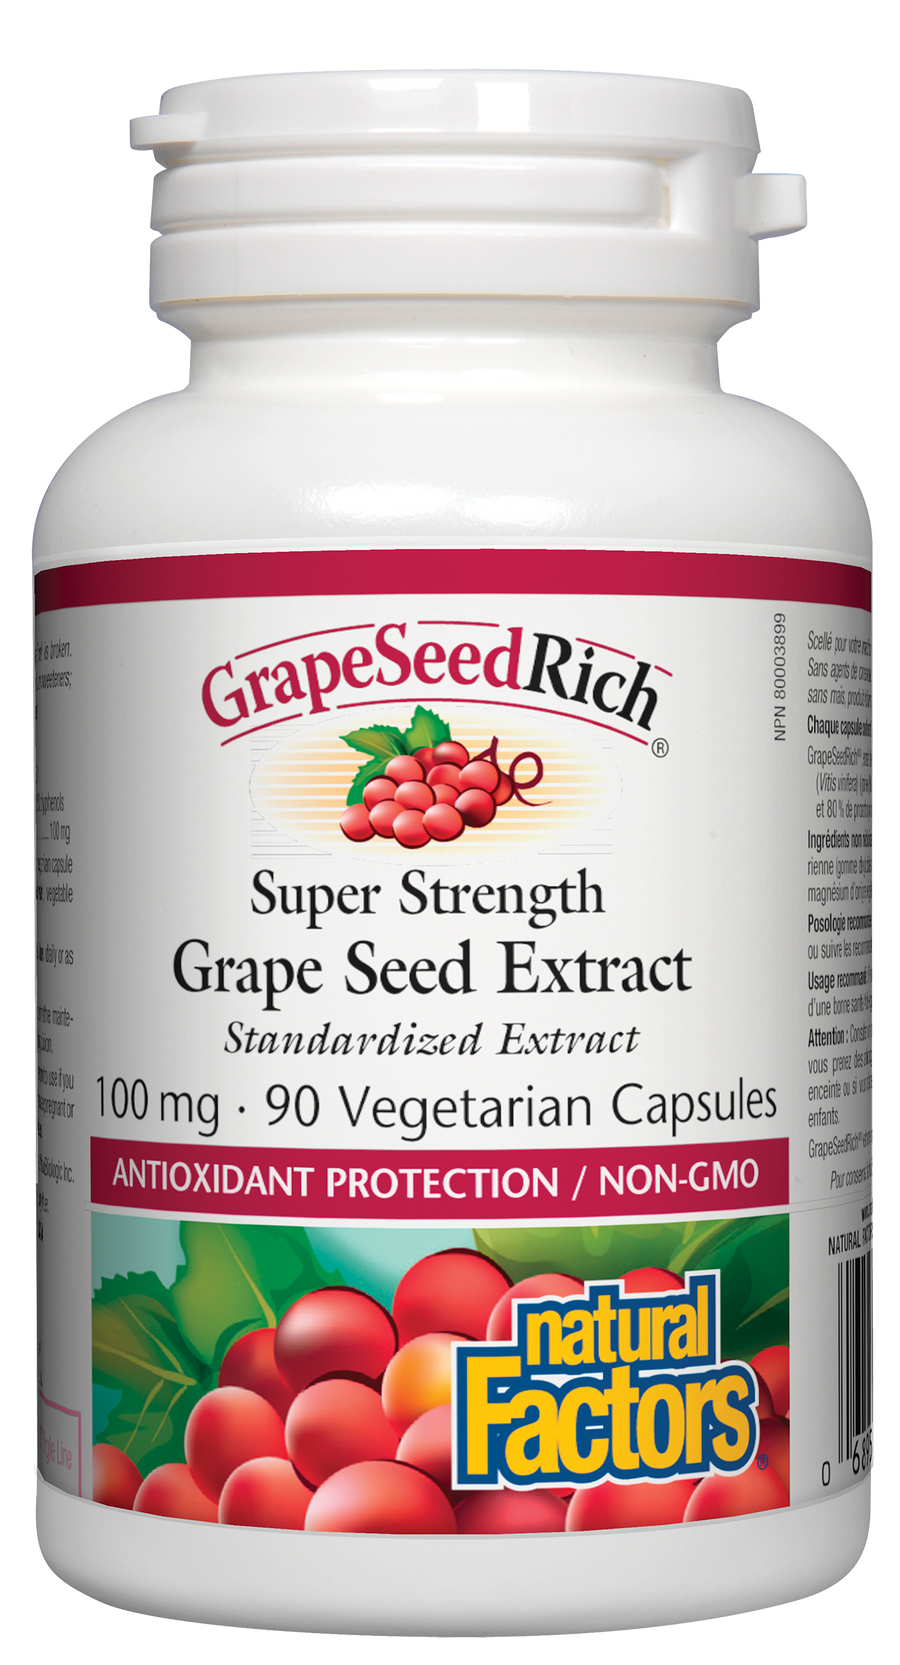 Natural Factors GrapeSeedRich Super Strength Grape Seed Extract 100 mg 90 Veg. Capsules